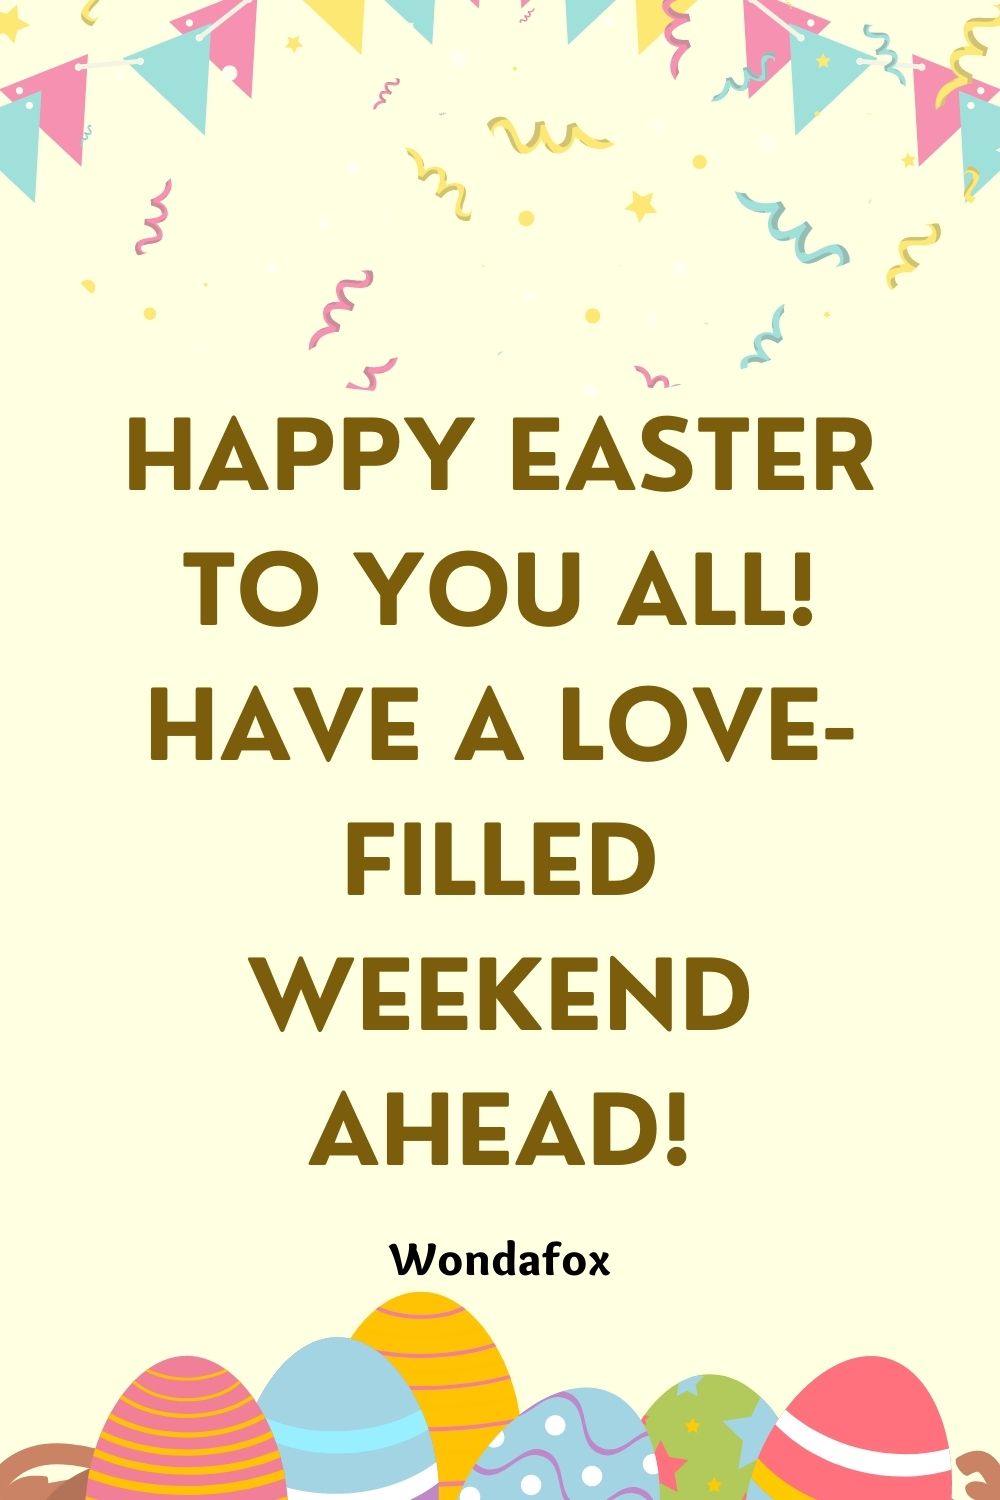 Happy Easter to you all! Have a love-filled weekend ahead!